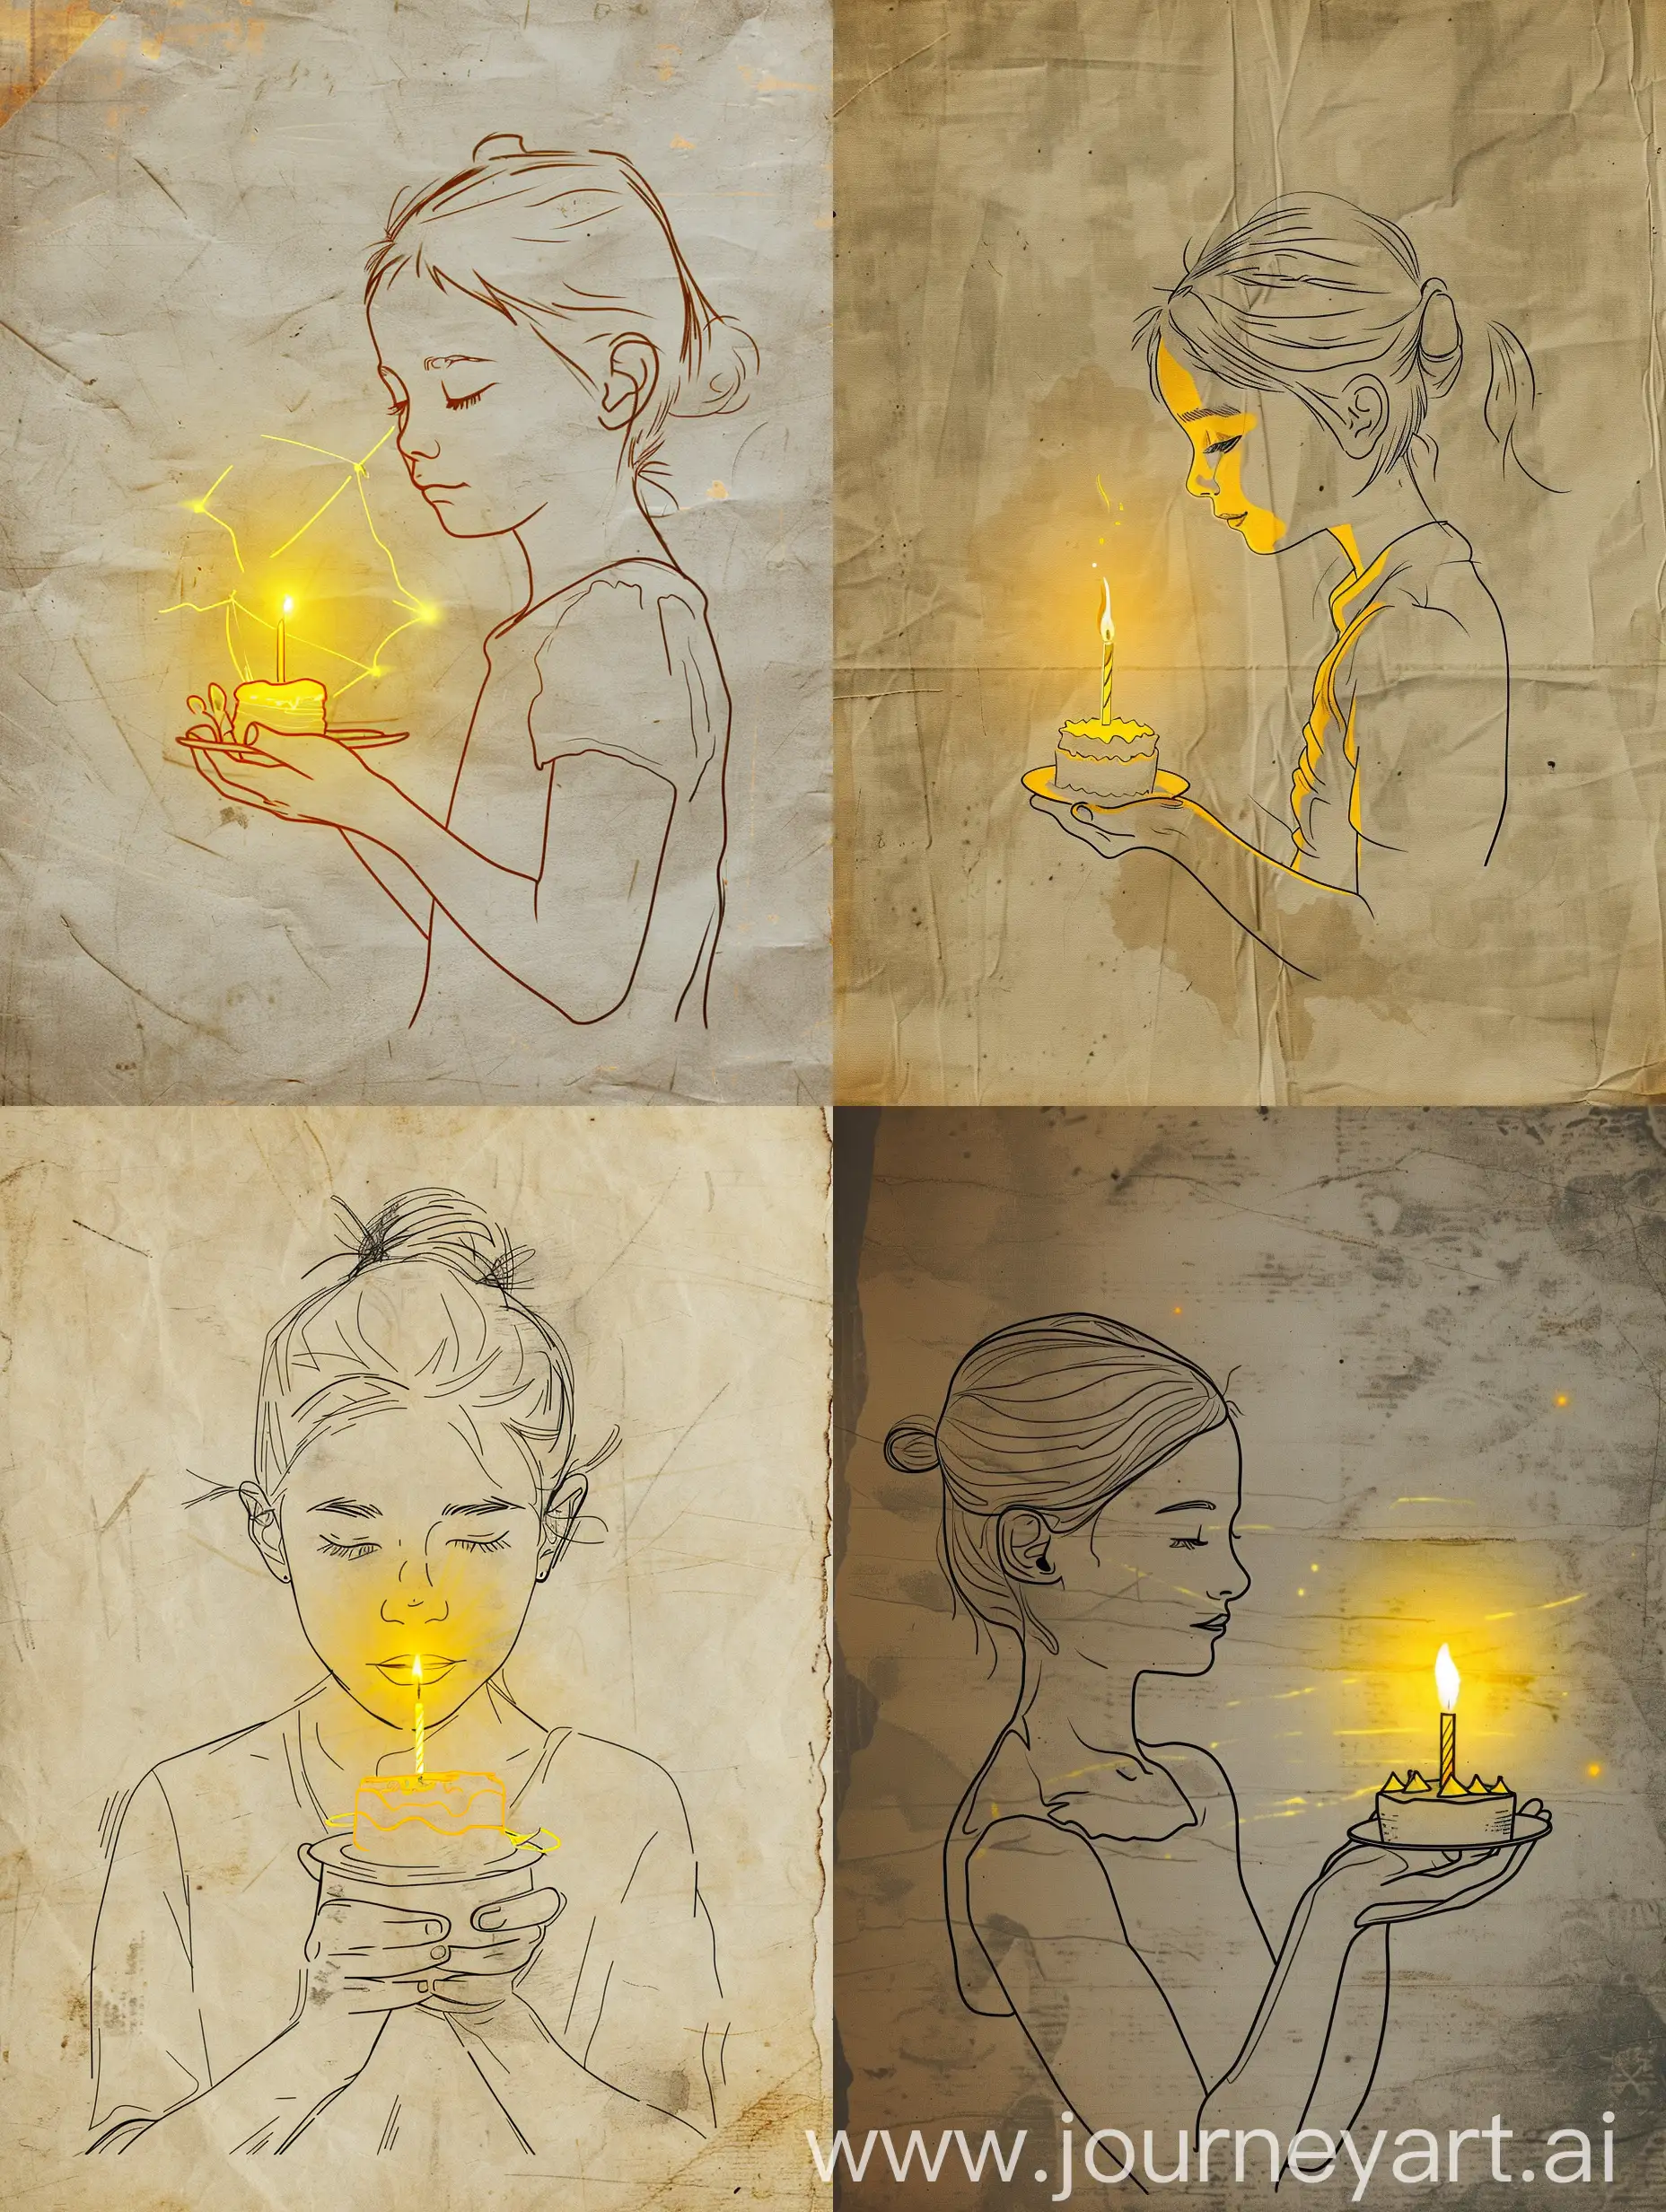 a very simple and minimalist outline sketch/line drawing portrait on old paper depicts a young girl holding a small cake with one lit candle on it. The yellow light from the candle illuminates her face in the drawing, creating the illusion of three-dimensional depth on the minimalist outline illustration.